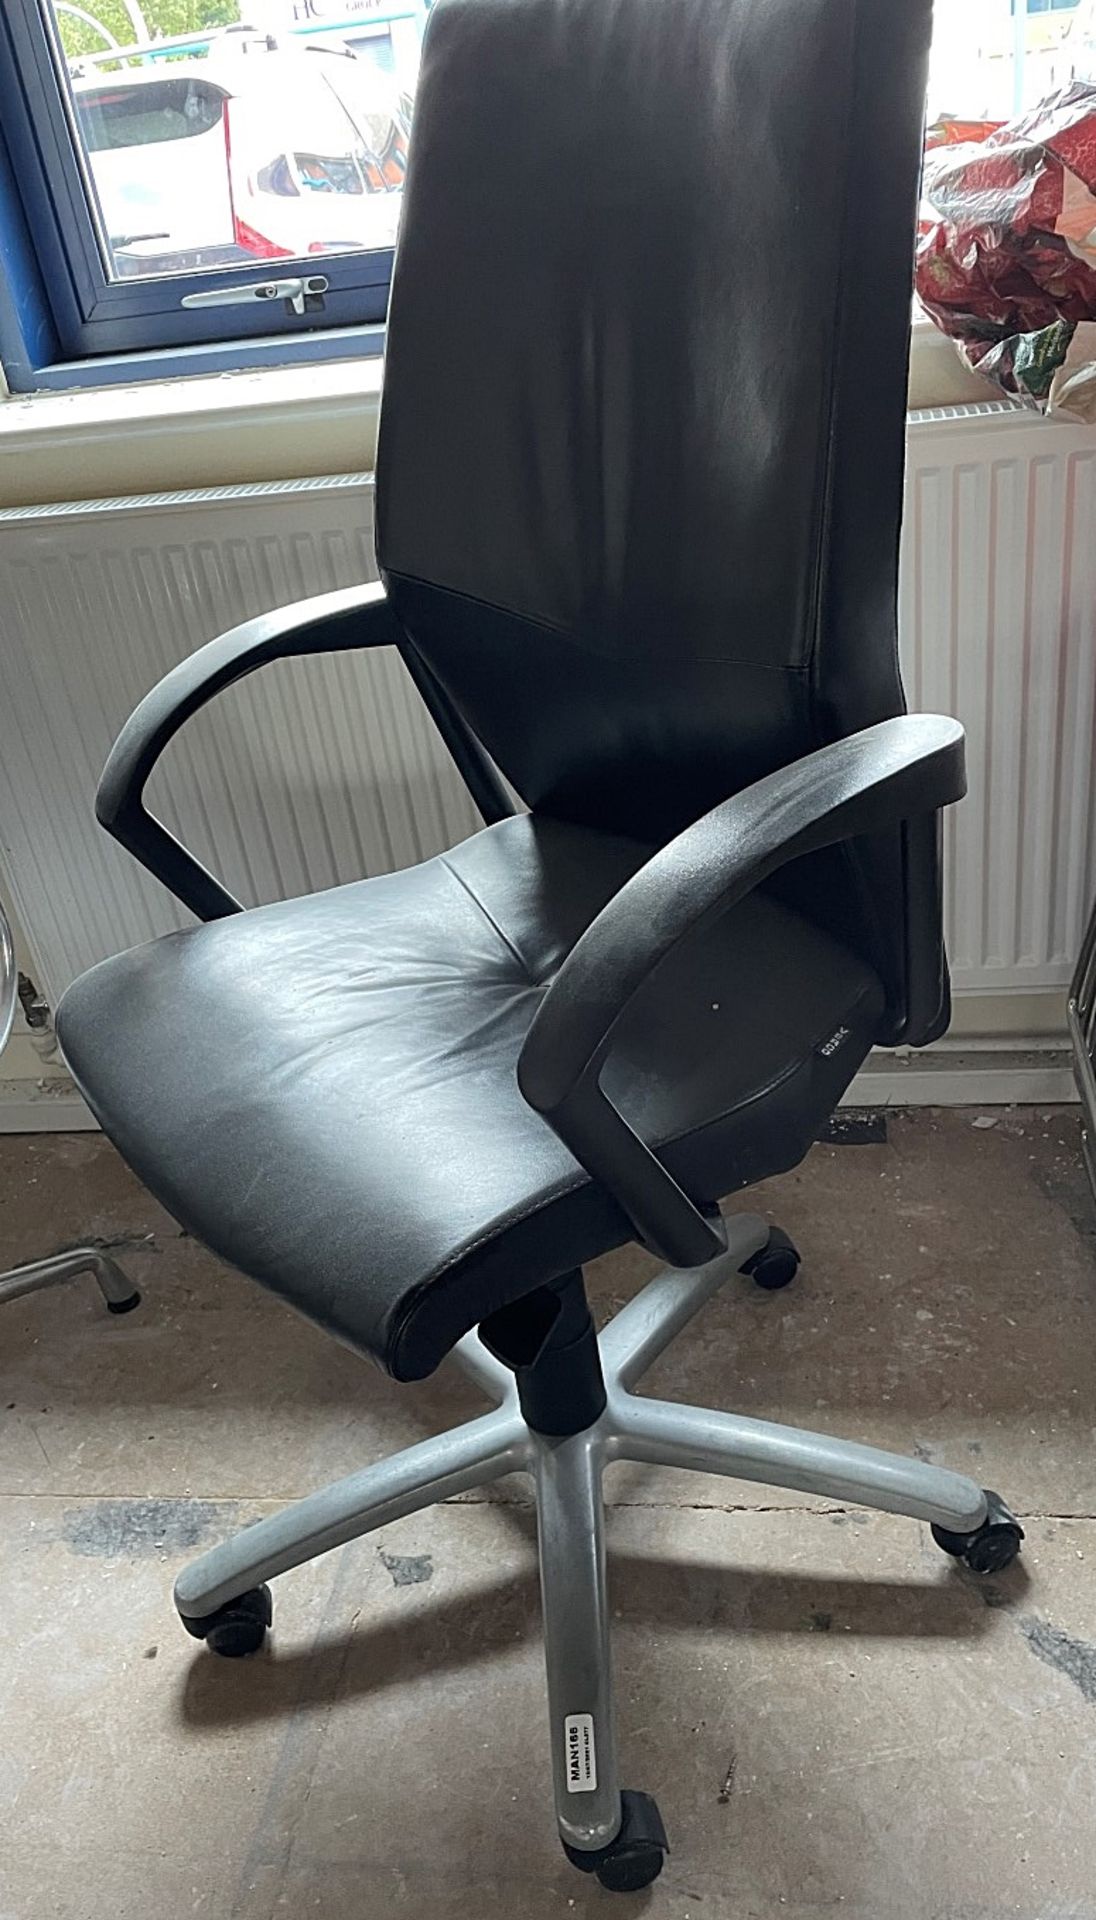 1 x Verco Ergonomic Operators Black Leather Swivel Office Chair - From A Executive Office - Image 2 of 4